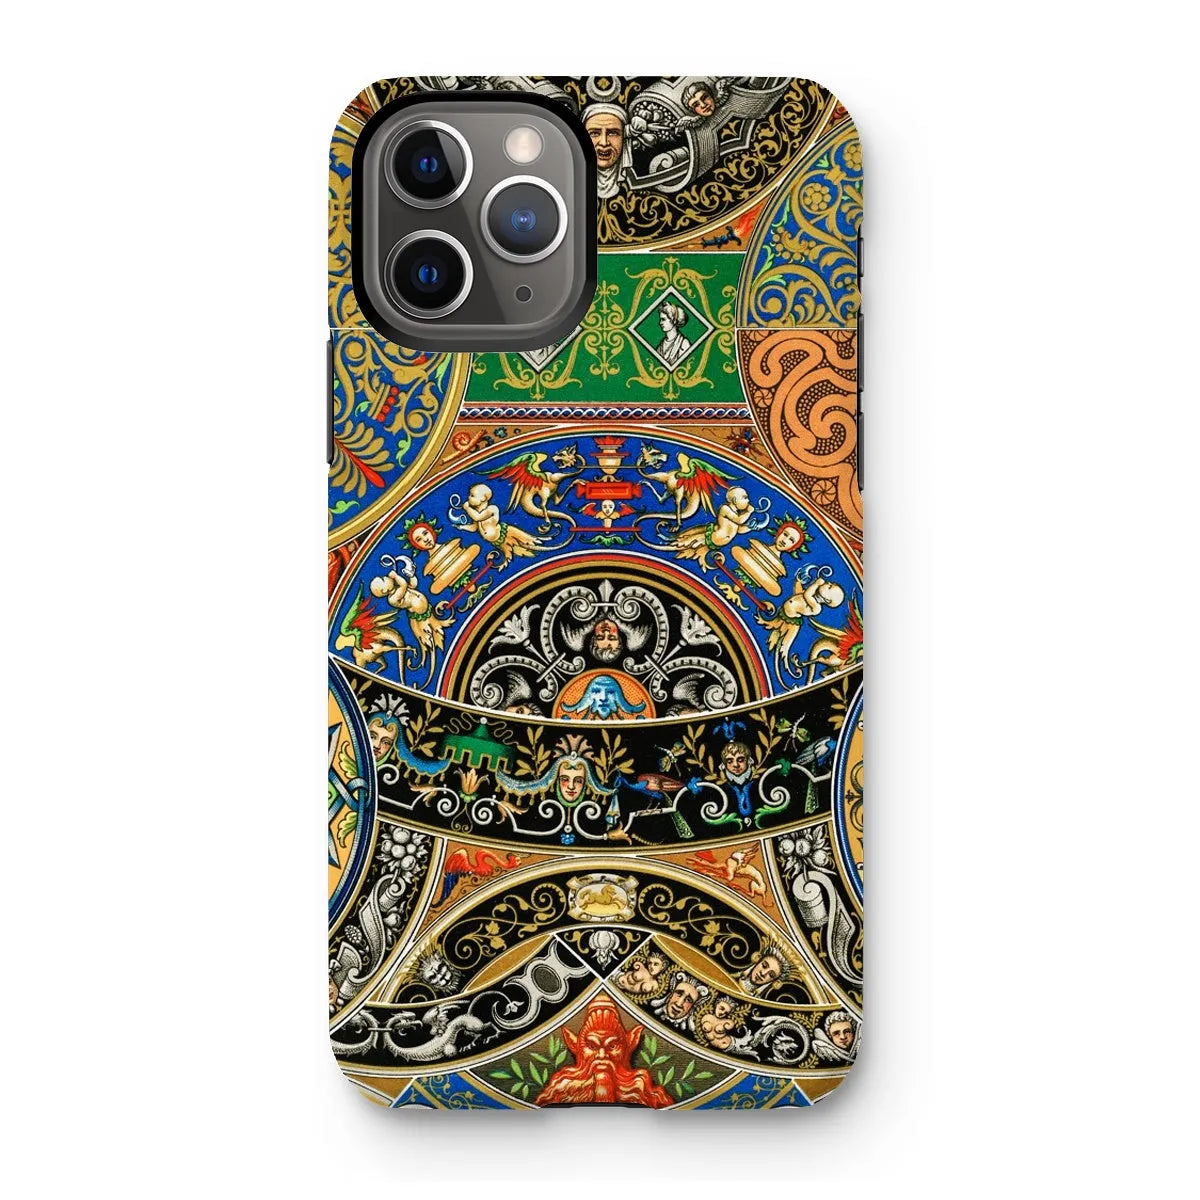 Renaissance Pattern 2 By Auguste Racinet Tough Phone Case - Iphone 11 Pro / Gloss - Mobile Phone Cases - Aesthetic Art